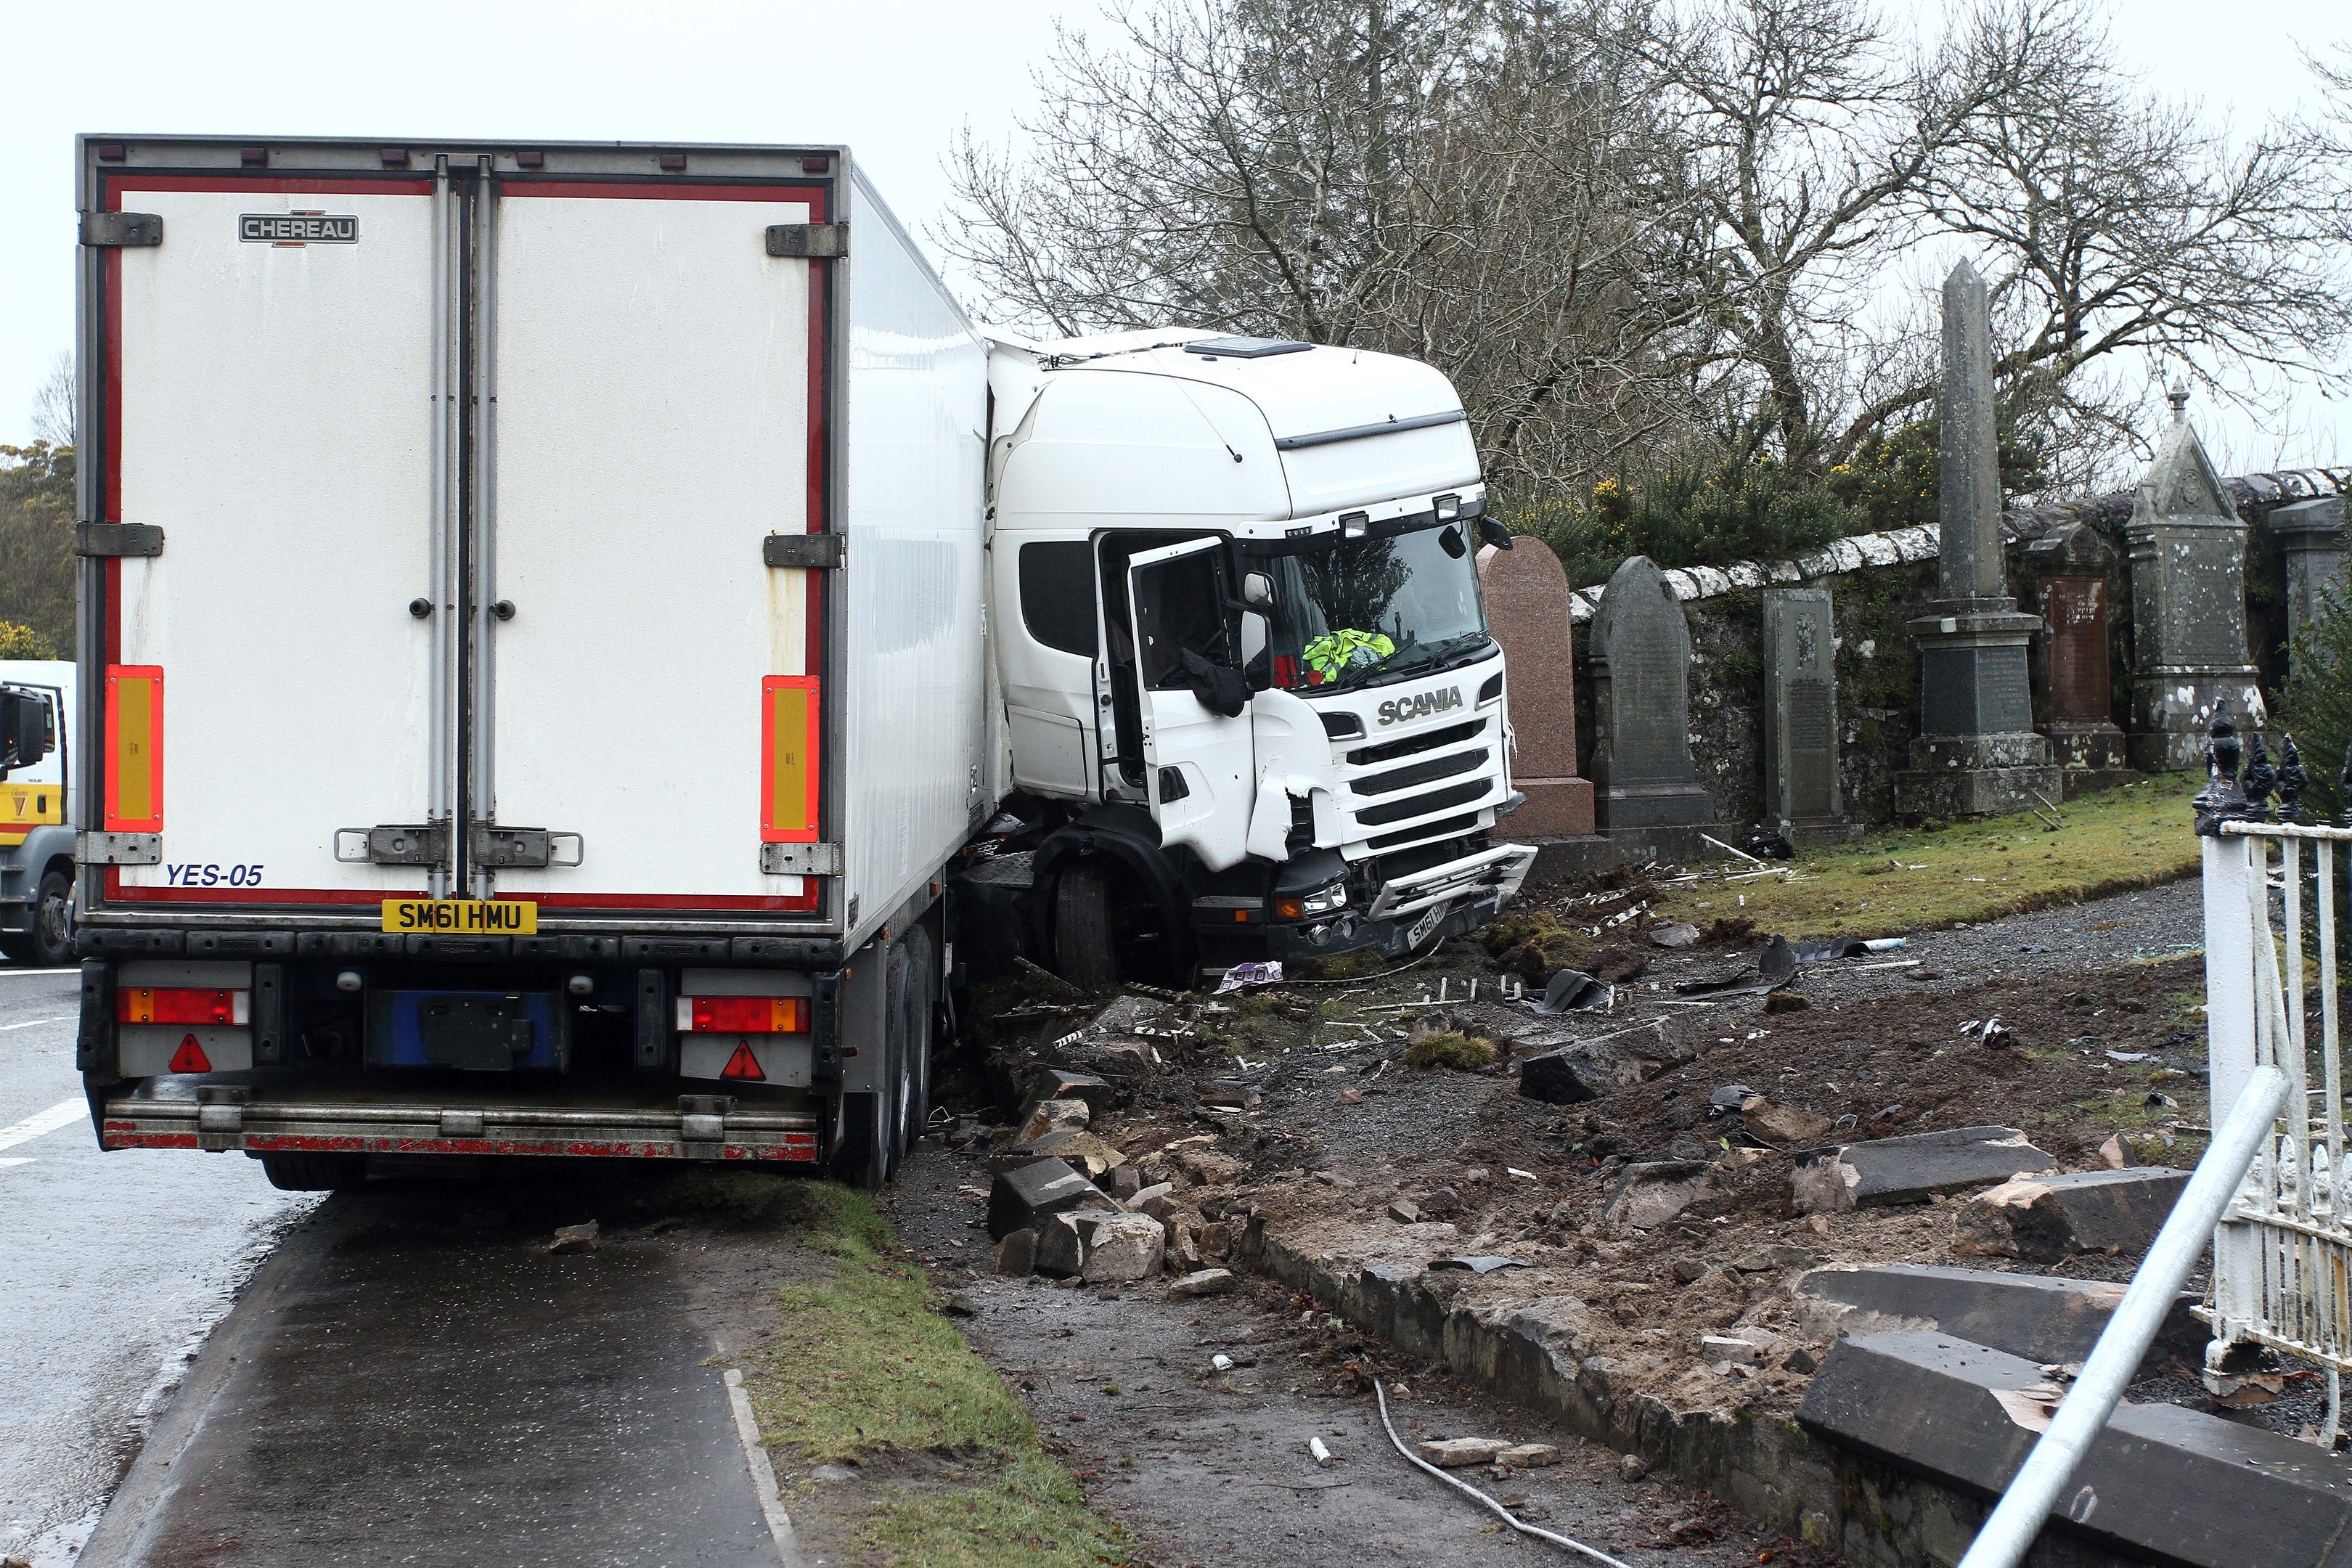 The lorry has crashed into a cemetery in Oban, blocking the road